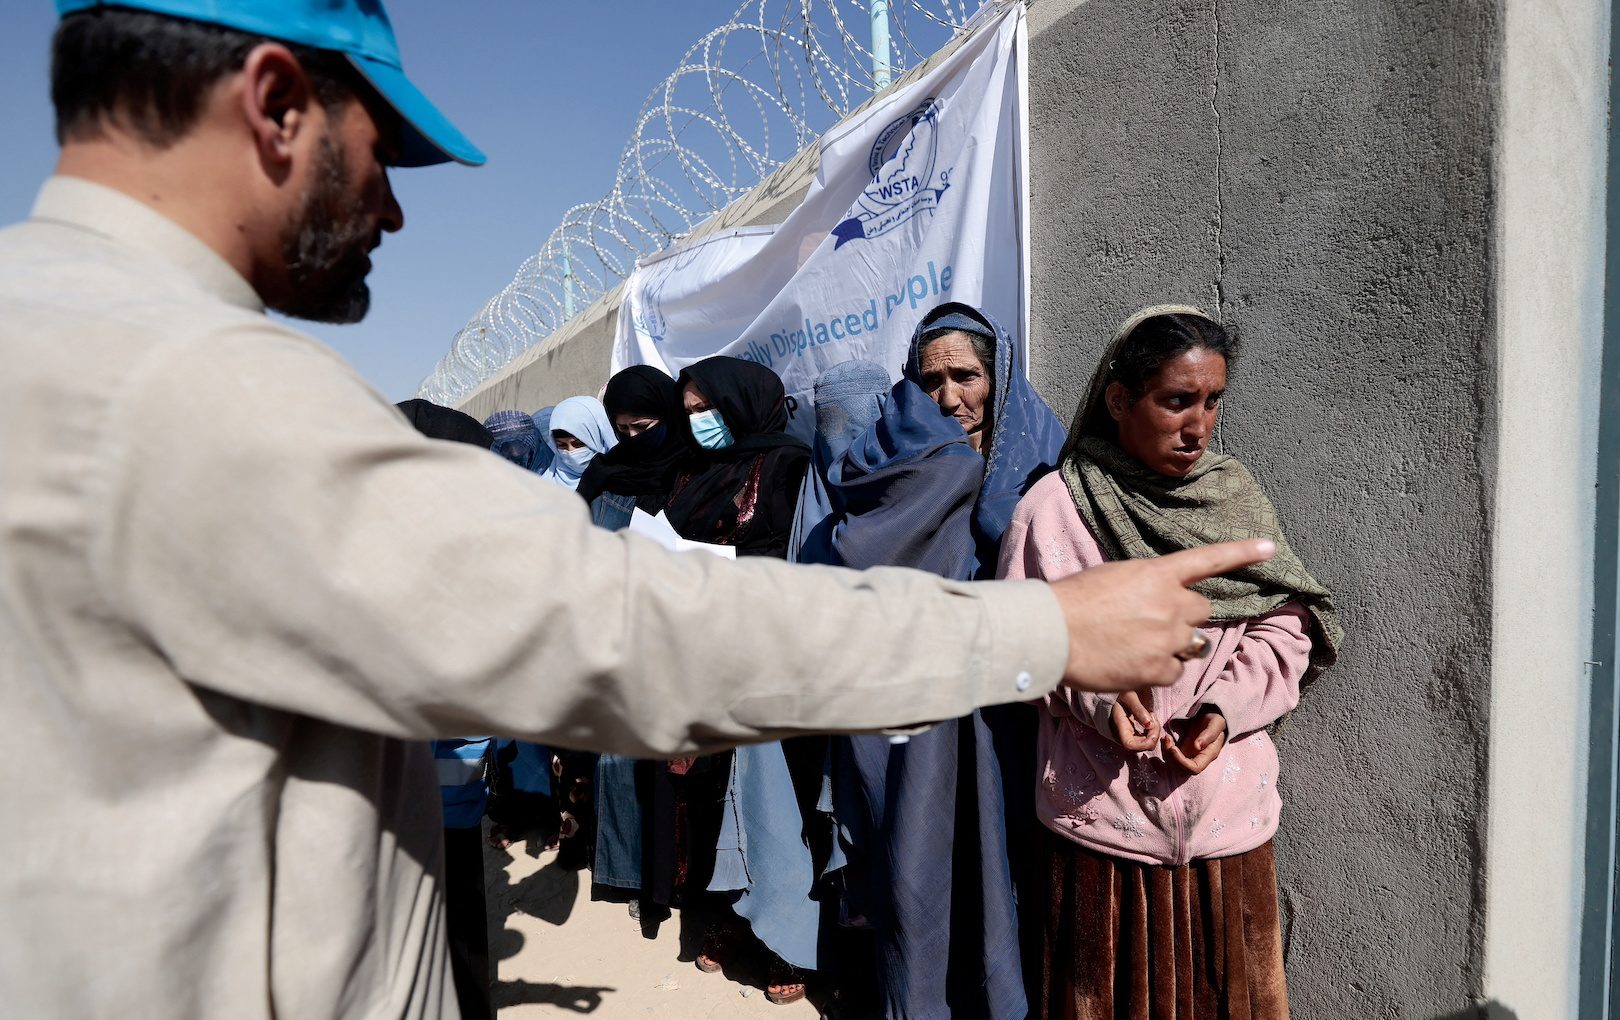 Journalists working with UN released after detention in Afghanistan